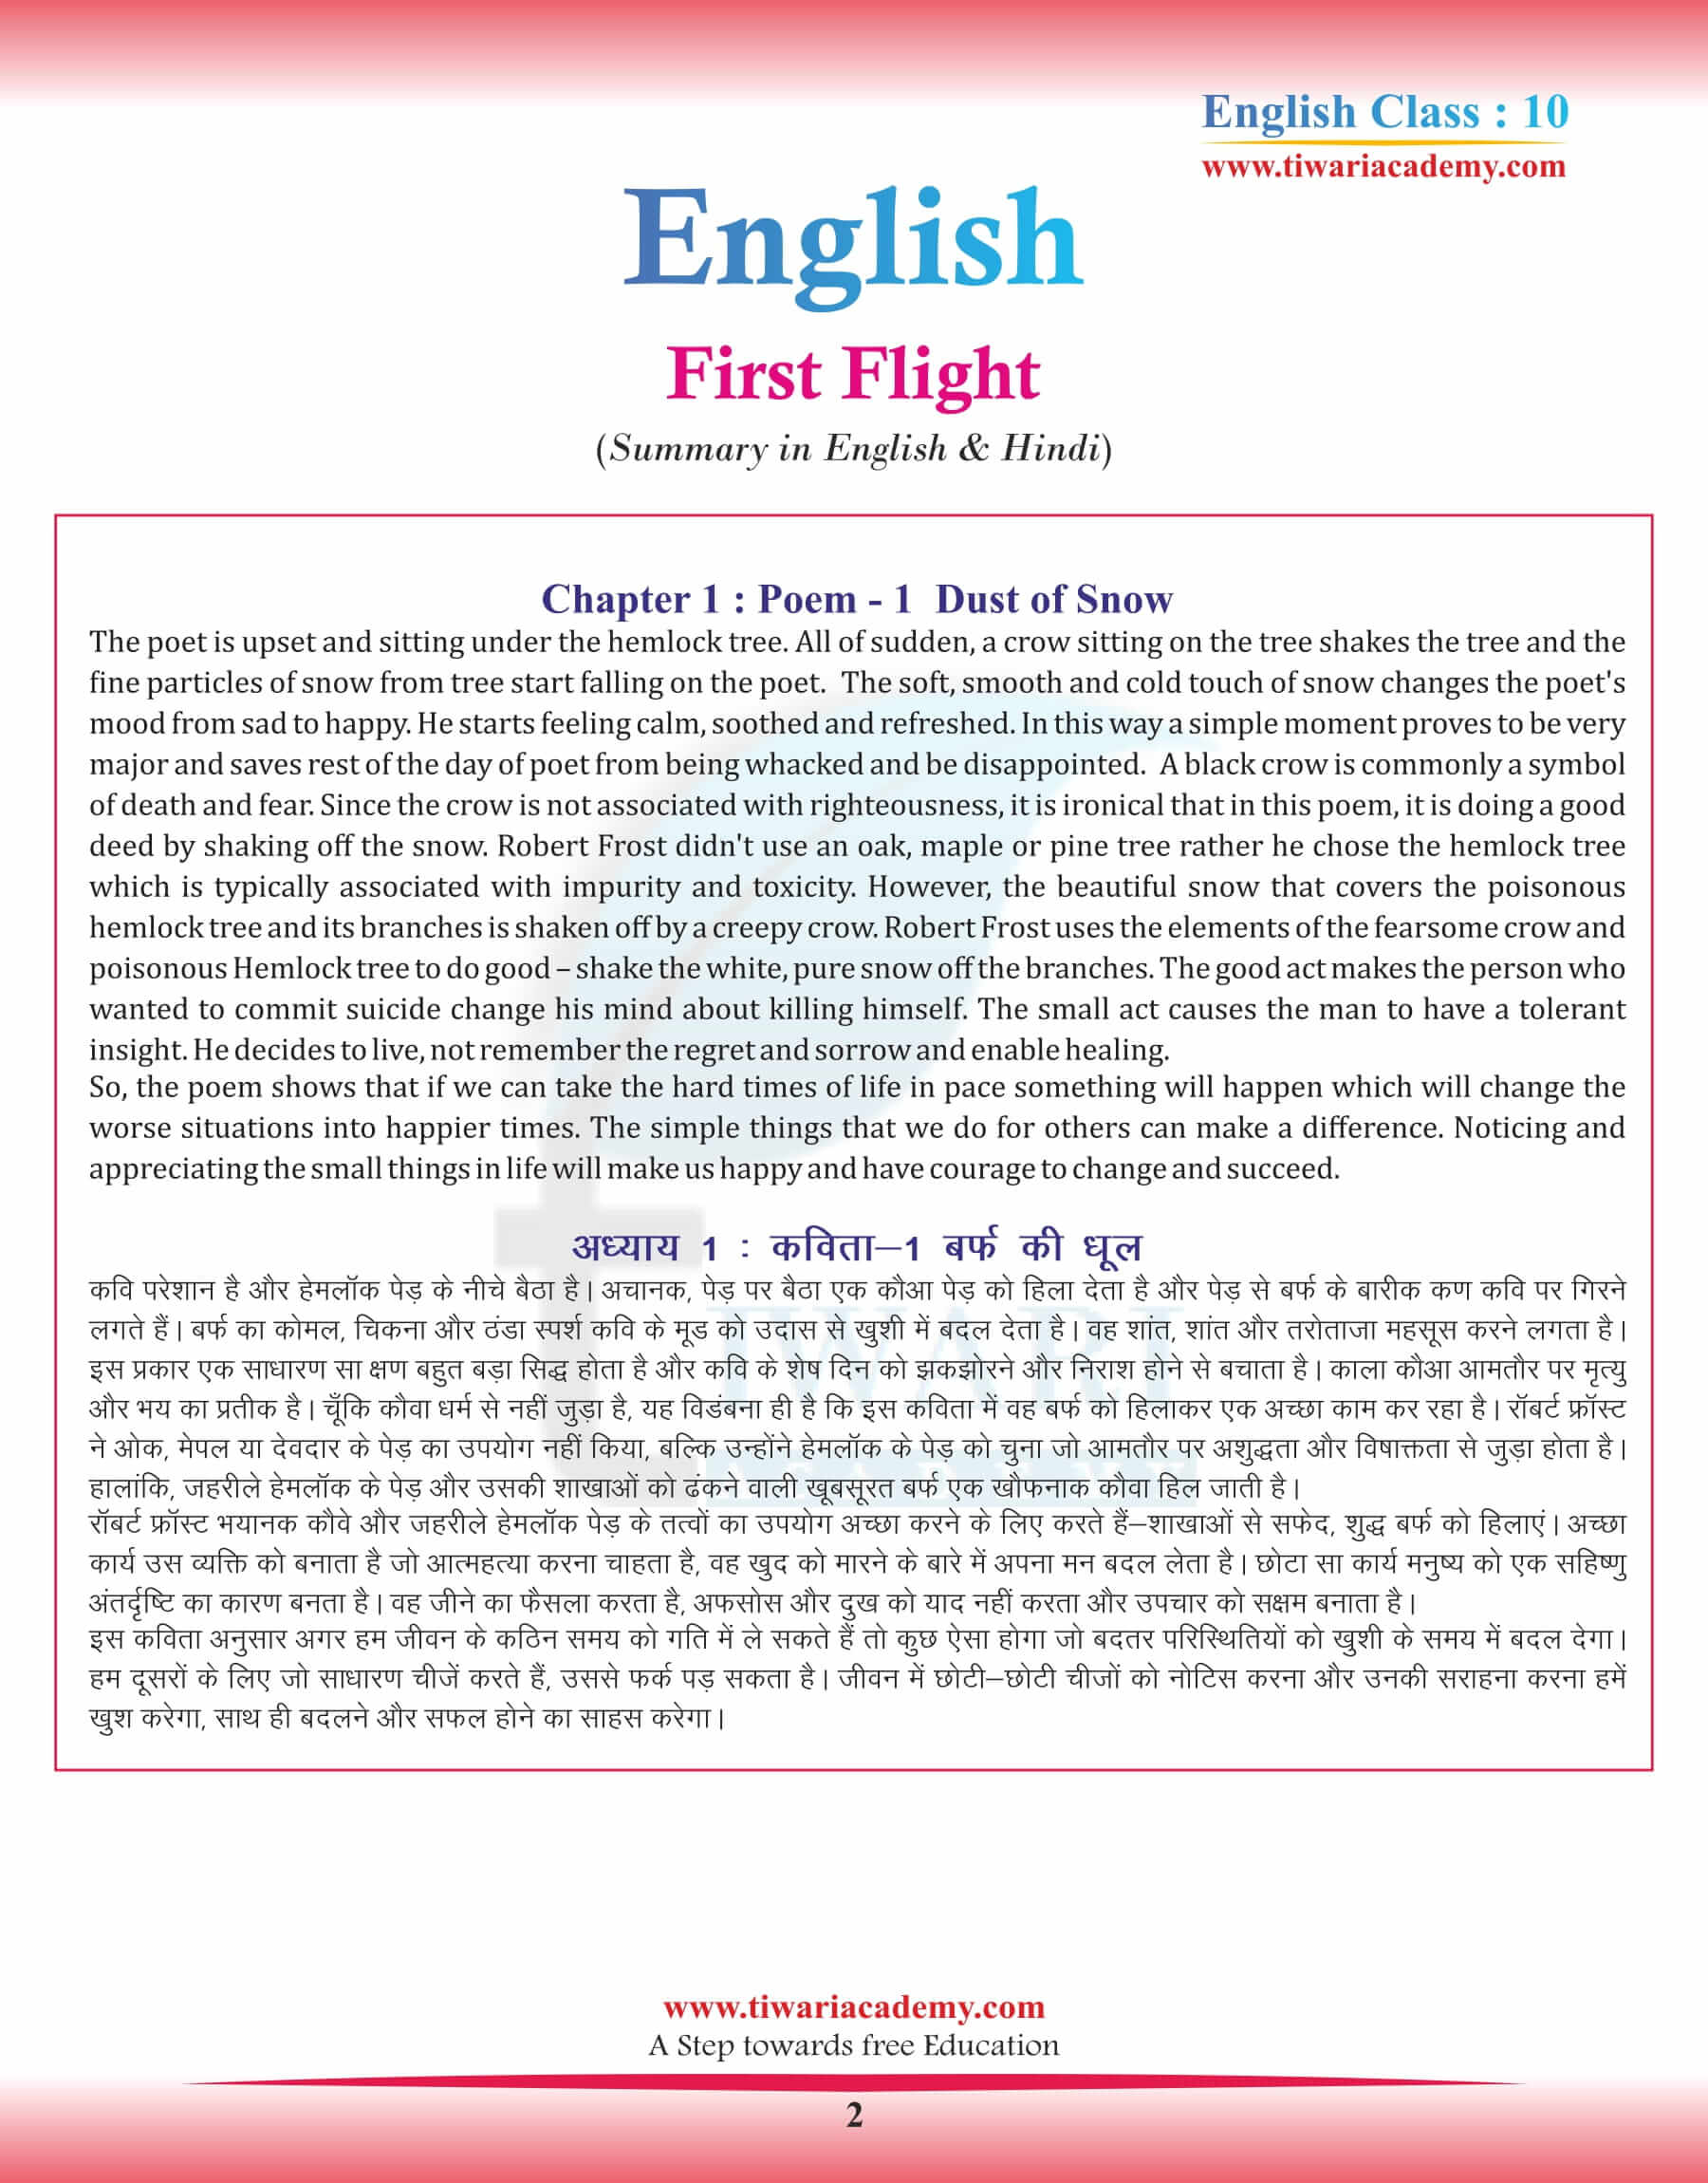 Class 10 English Chapter 1 Summary in English and Hindi